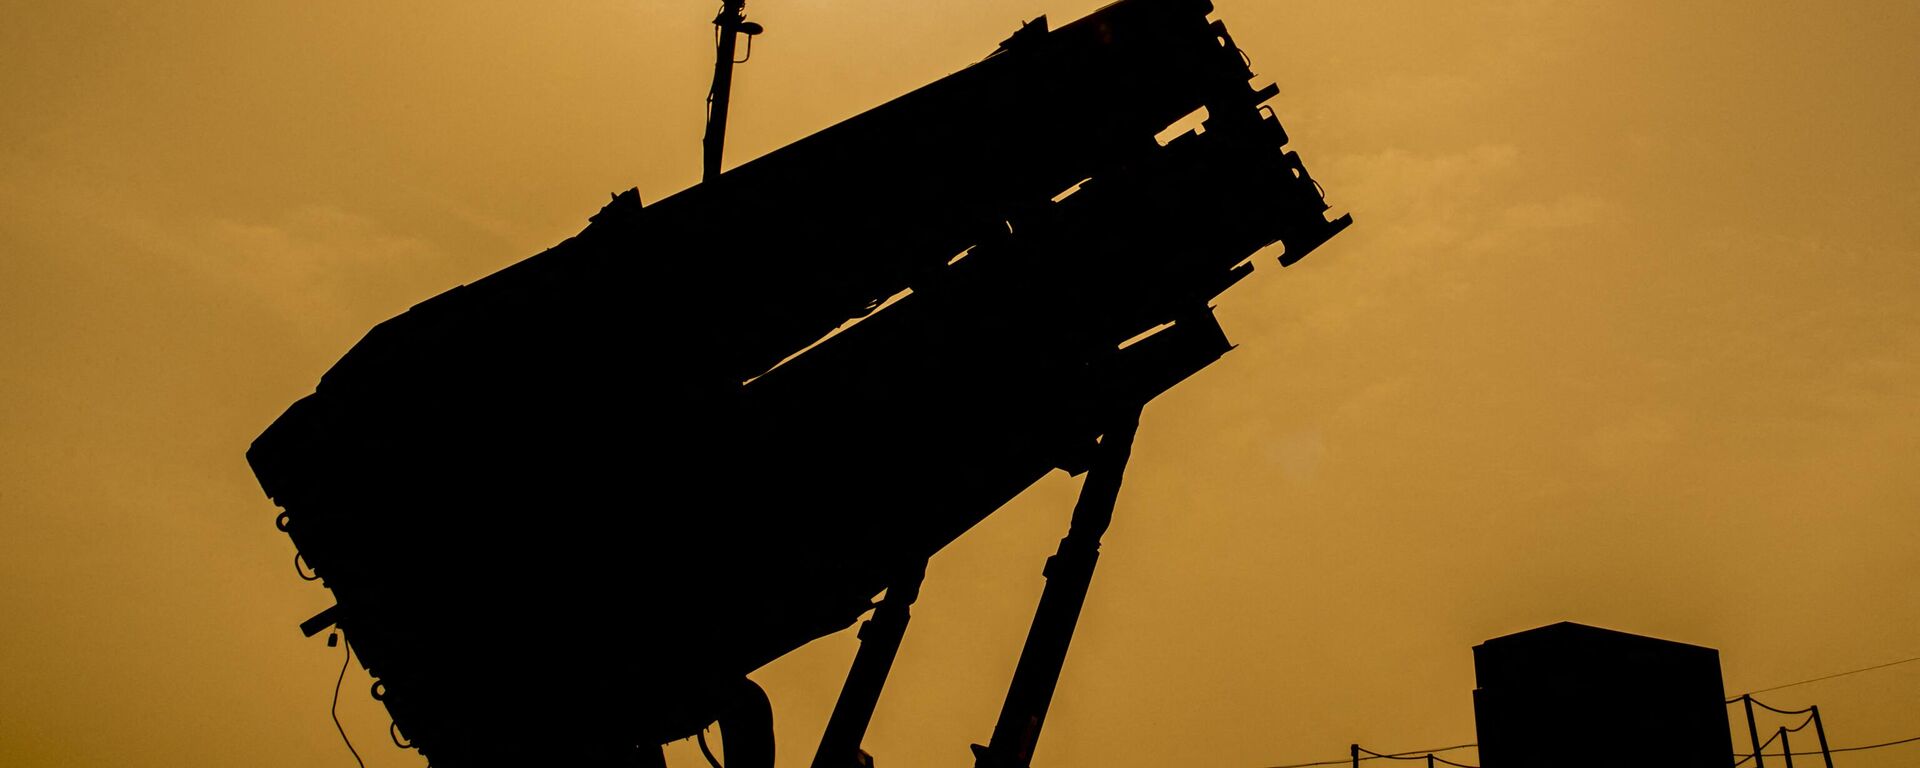 A US Patriot missile defence system is pictured at the Hatzor Airforce Base in Israel on March 8, 2018. - - Sputnik International, 1920, 14.12.2022